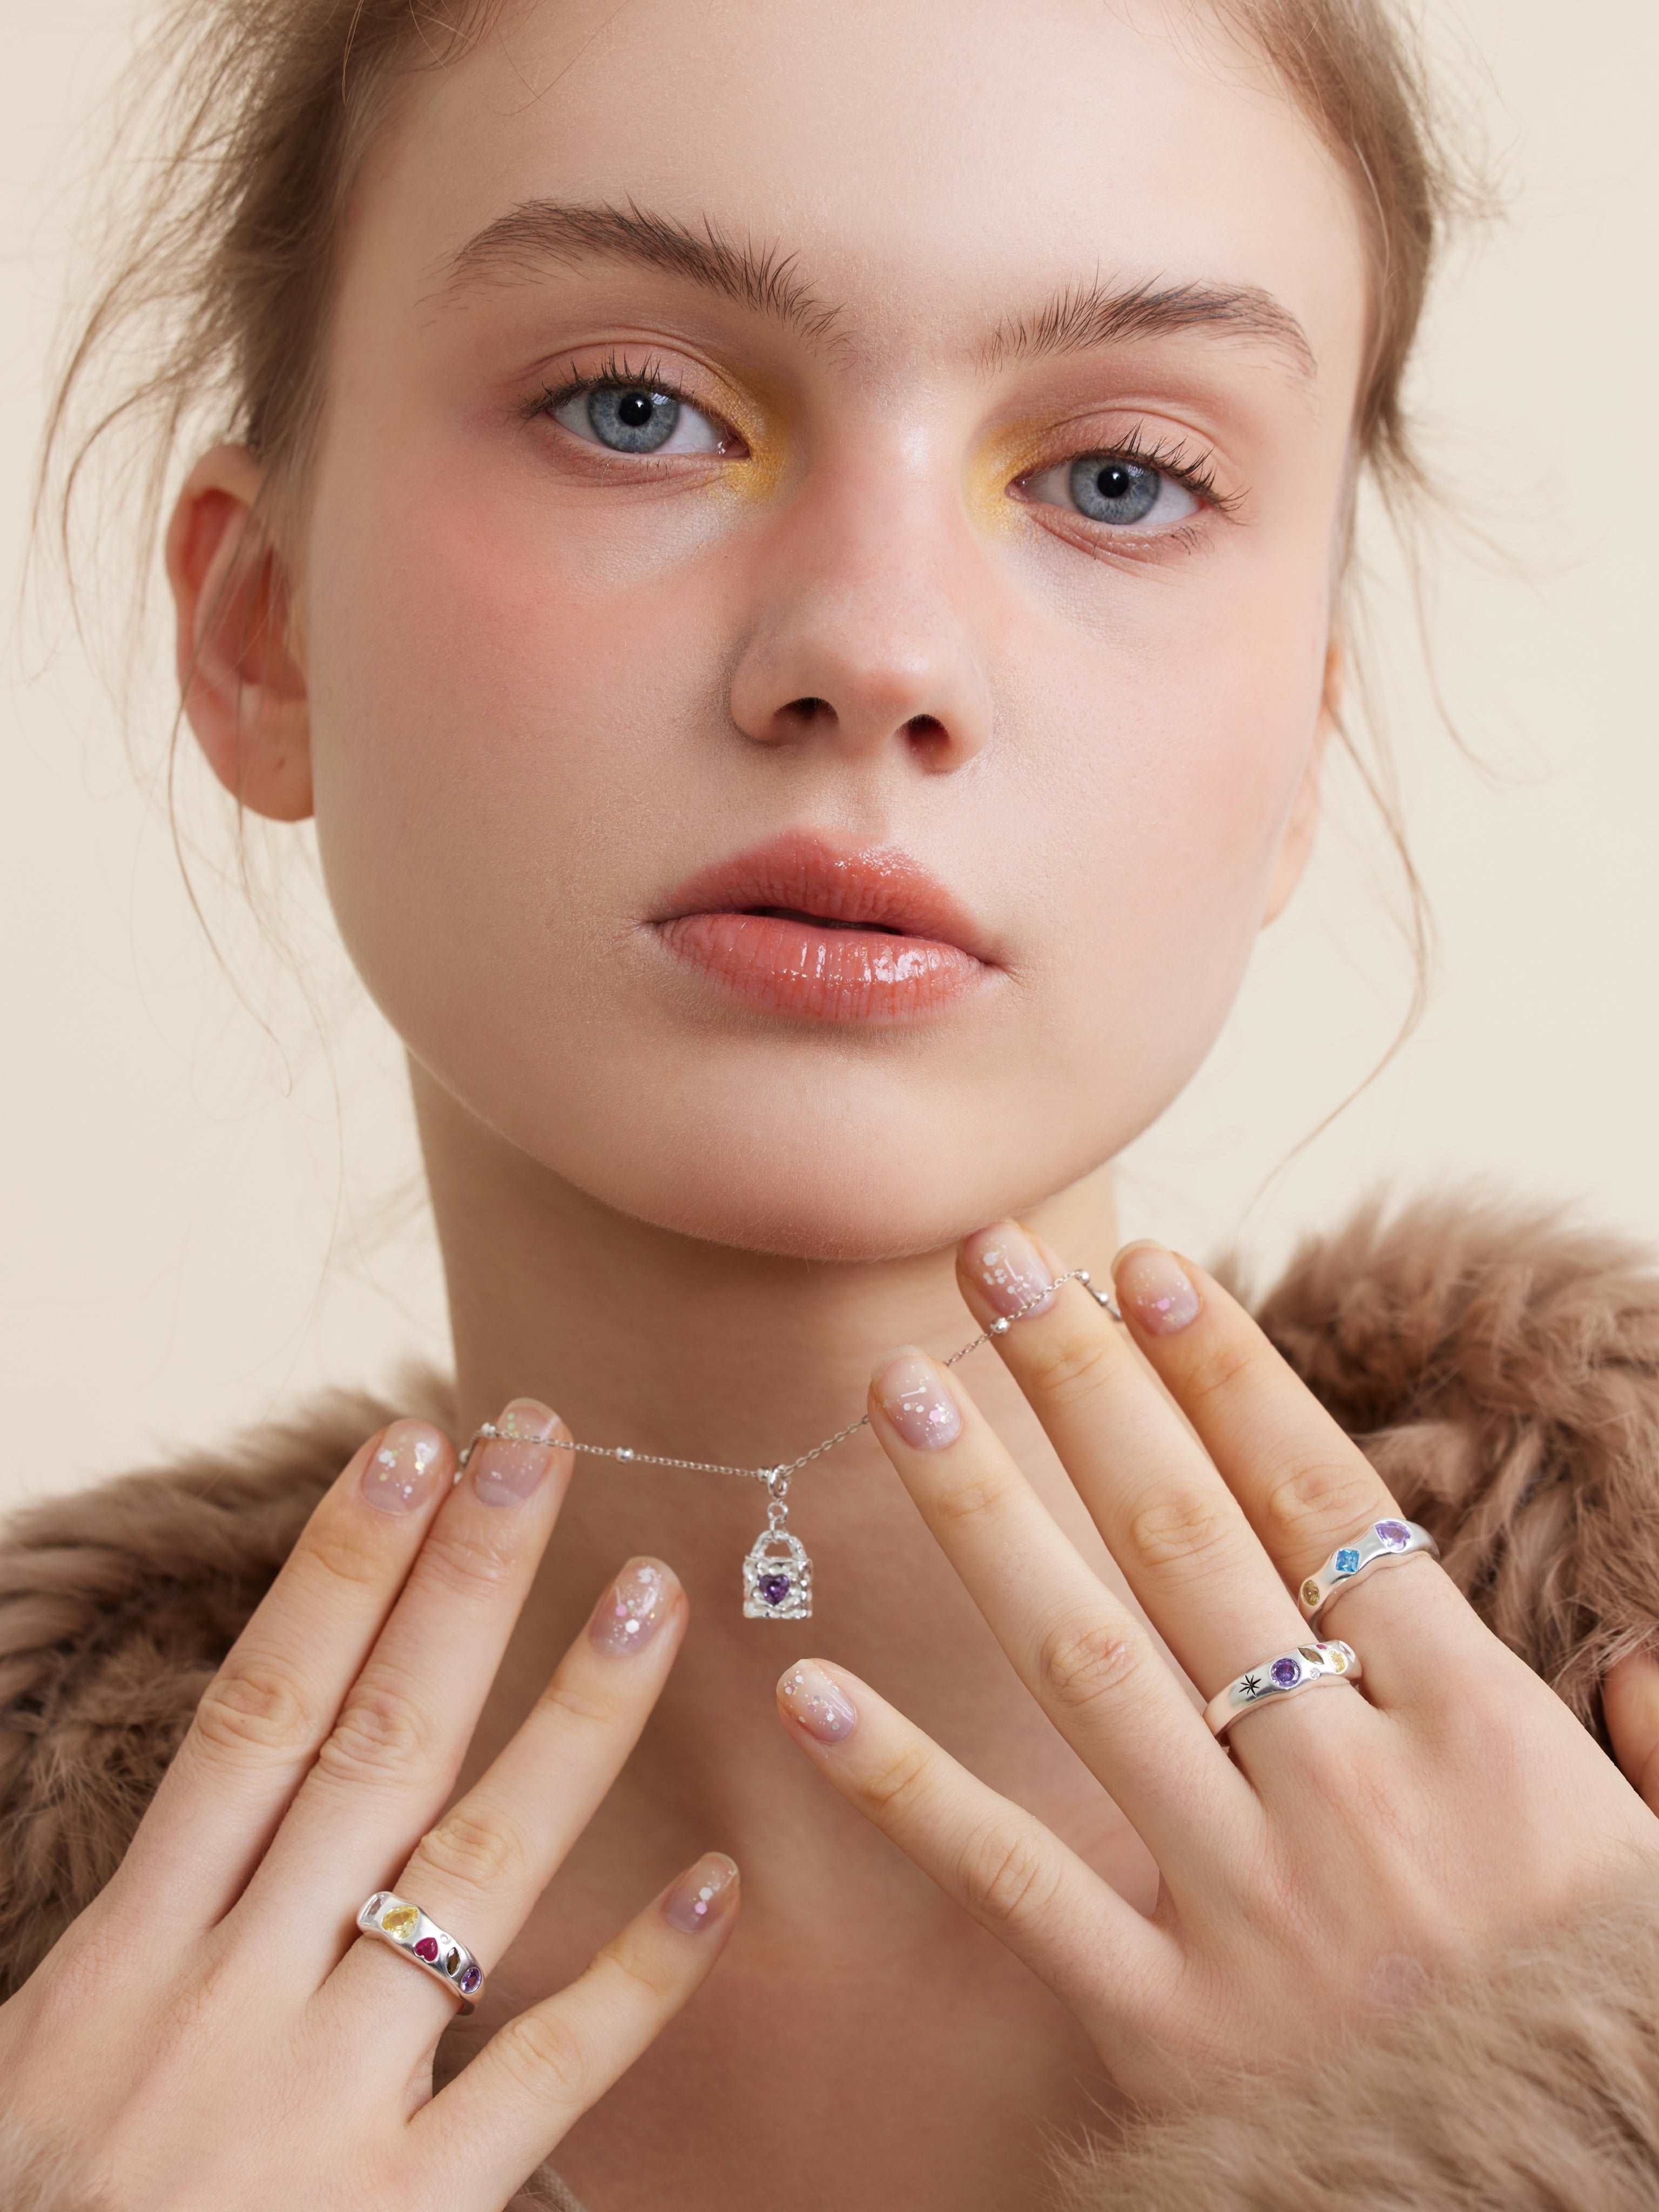 wearing Mini Lock silver Necklace and color astral ring